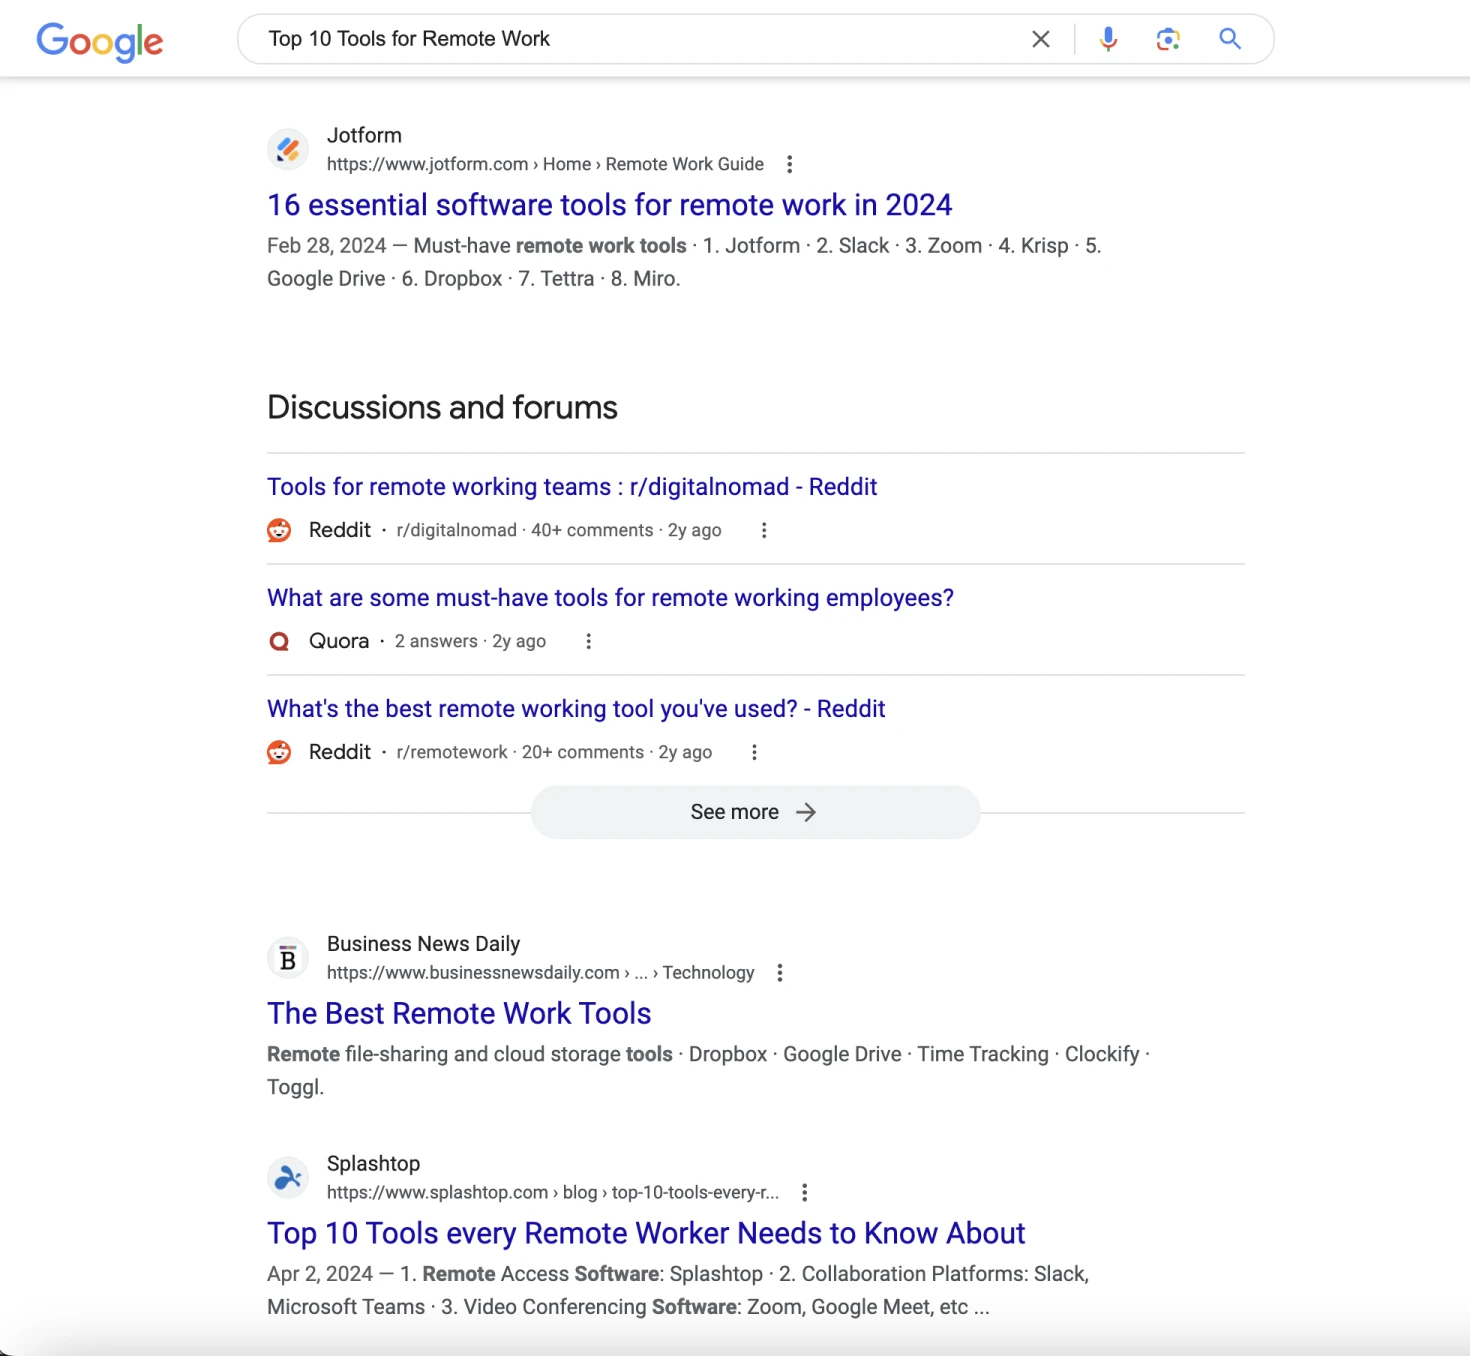 Google search for "Top 10 Tools for Remote Work" with listicle results from Jotform, Business News Daily, etc.